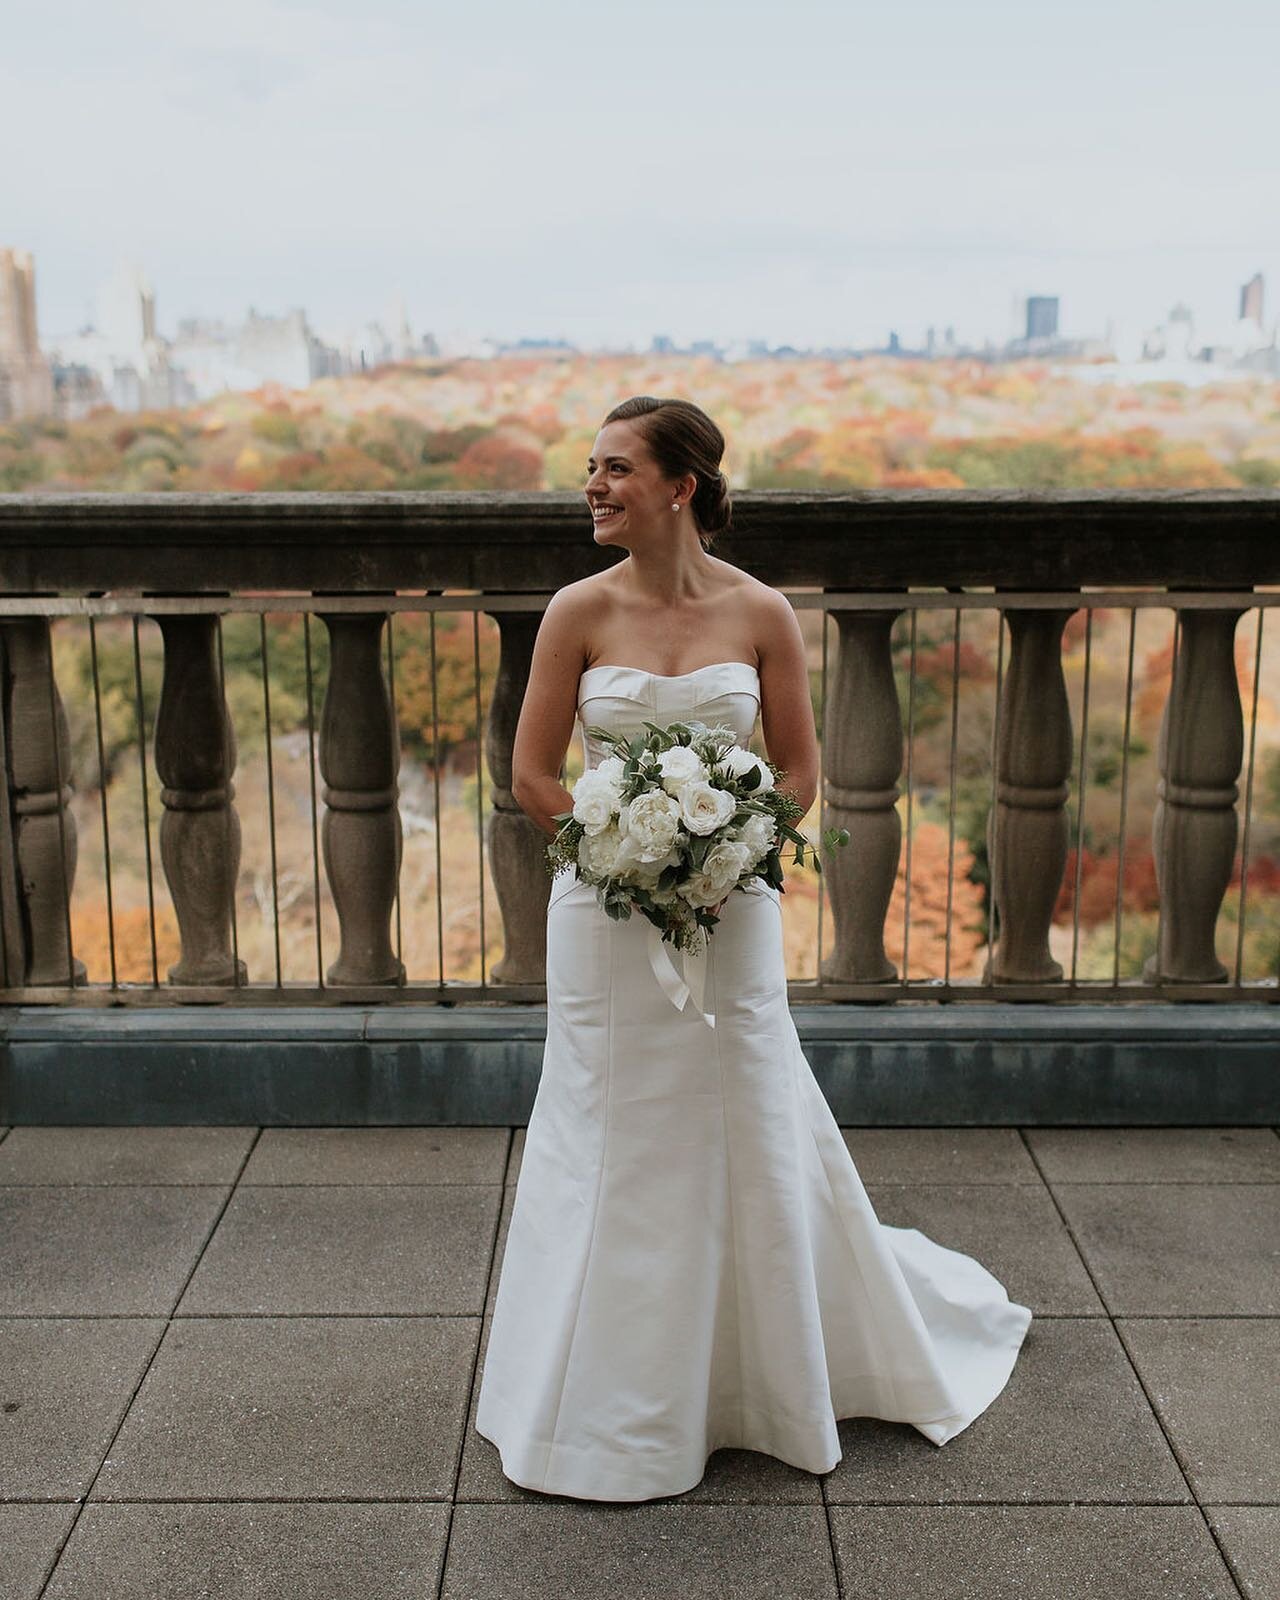 Happy Fall!  I miss New York in the fall and the gorgeous fall colors of Central Park.
 

Planning  @pinkbowtienyc
Ceremony  @stpatrickscathedral
Reception  @newyorkac
Photo  @taylorlenci
Floral  @denisefasanello
Rentals  @smithpartyrentals
Lighting 